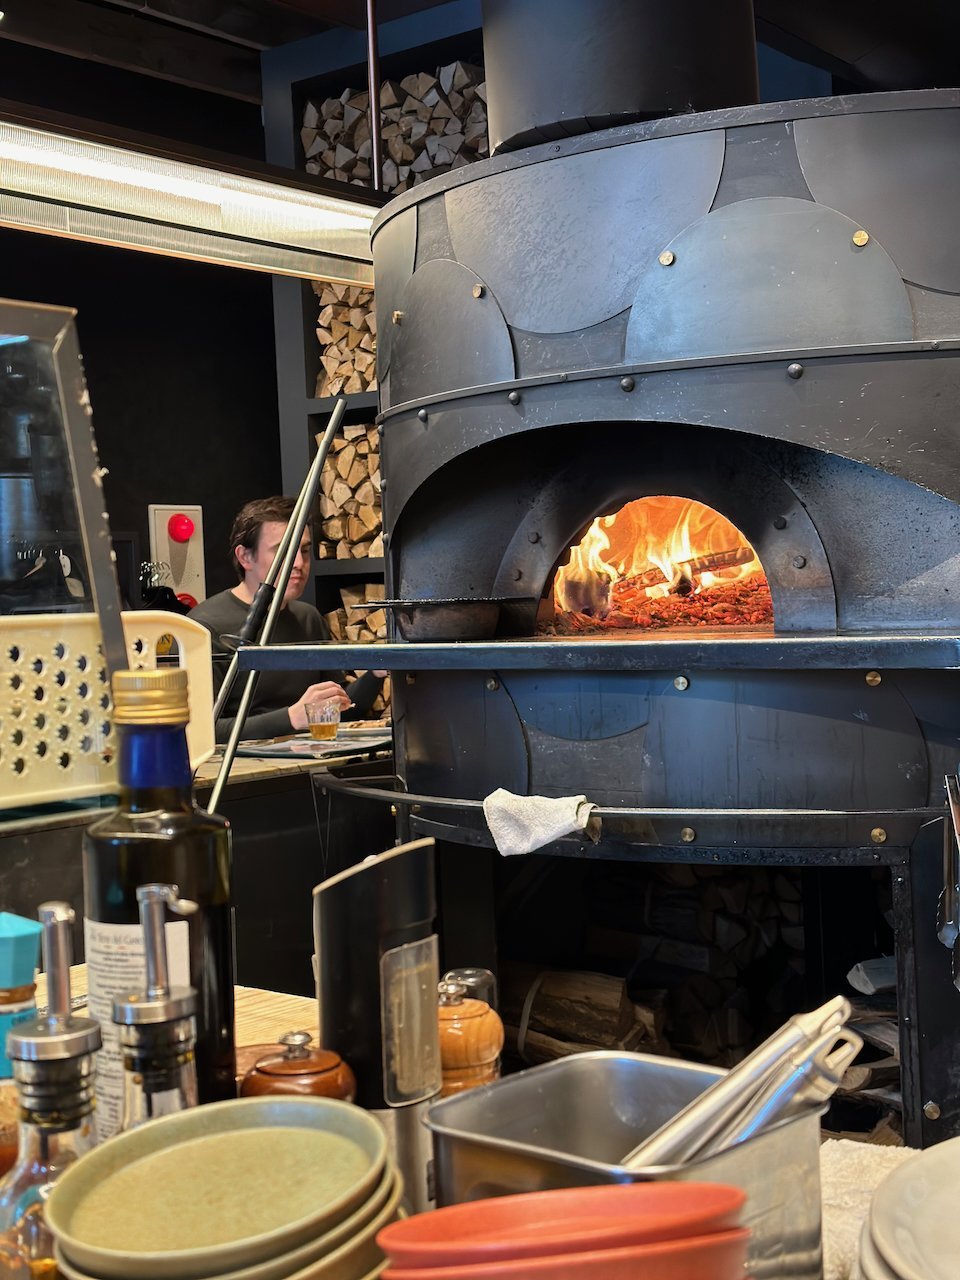 The wood-fired oven can be seen at the counter